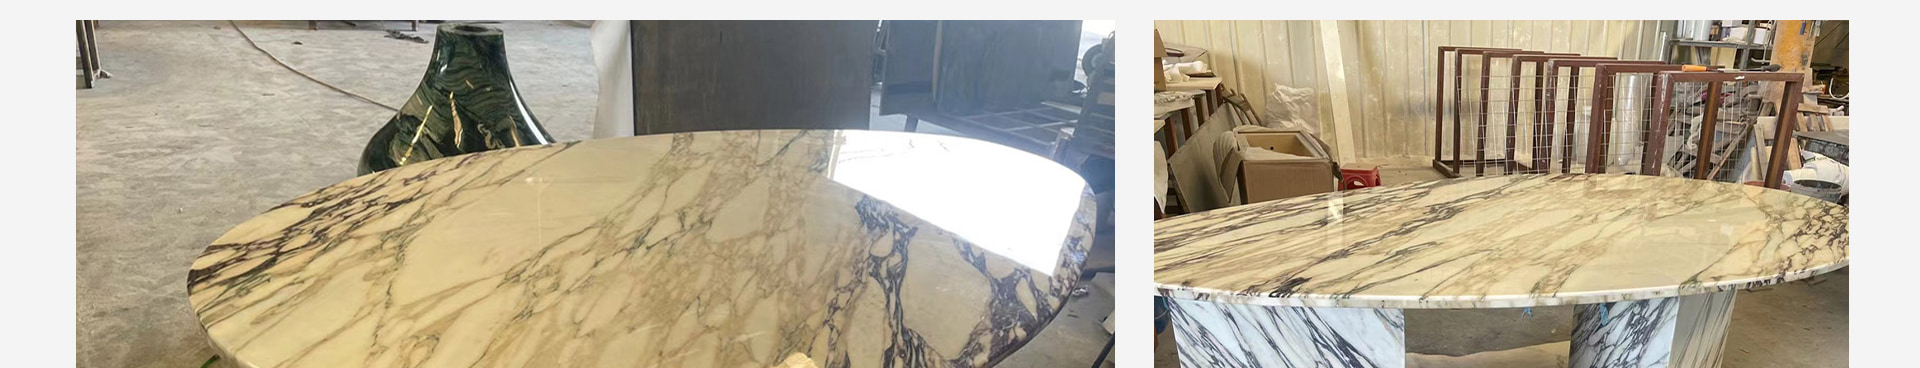 resin surface of stone countertop